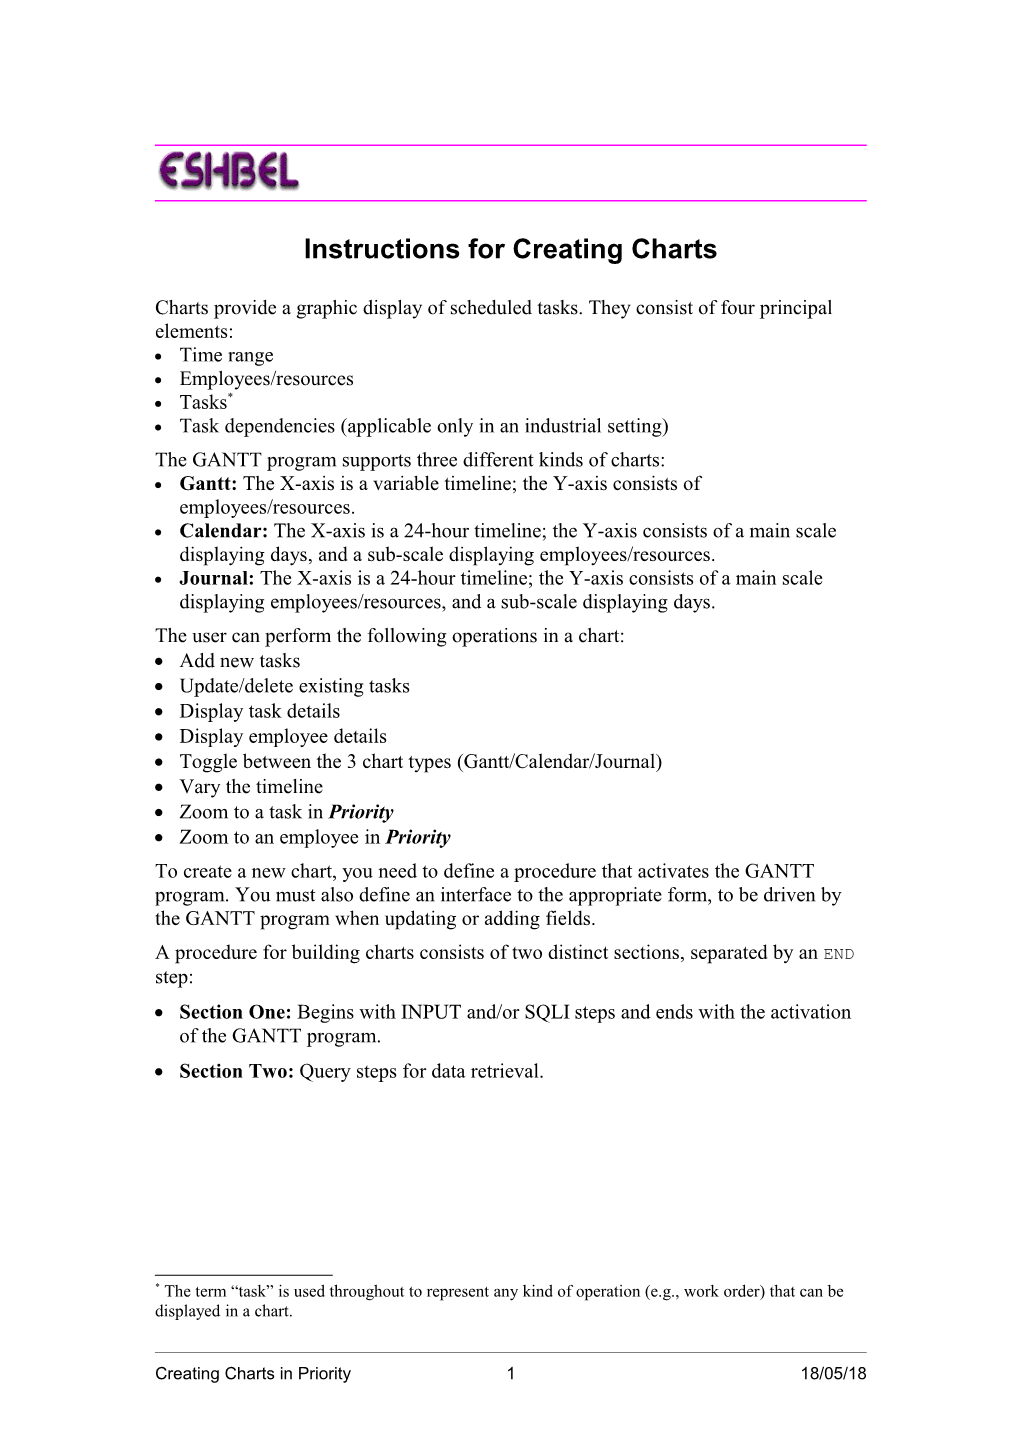 Instructions for Creating Charts